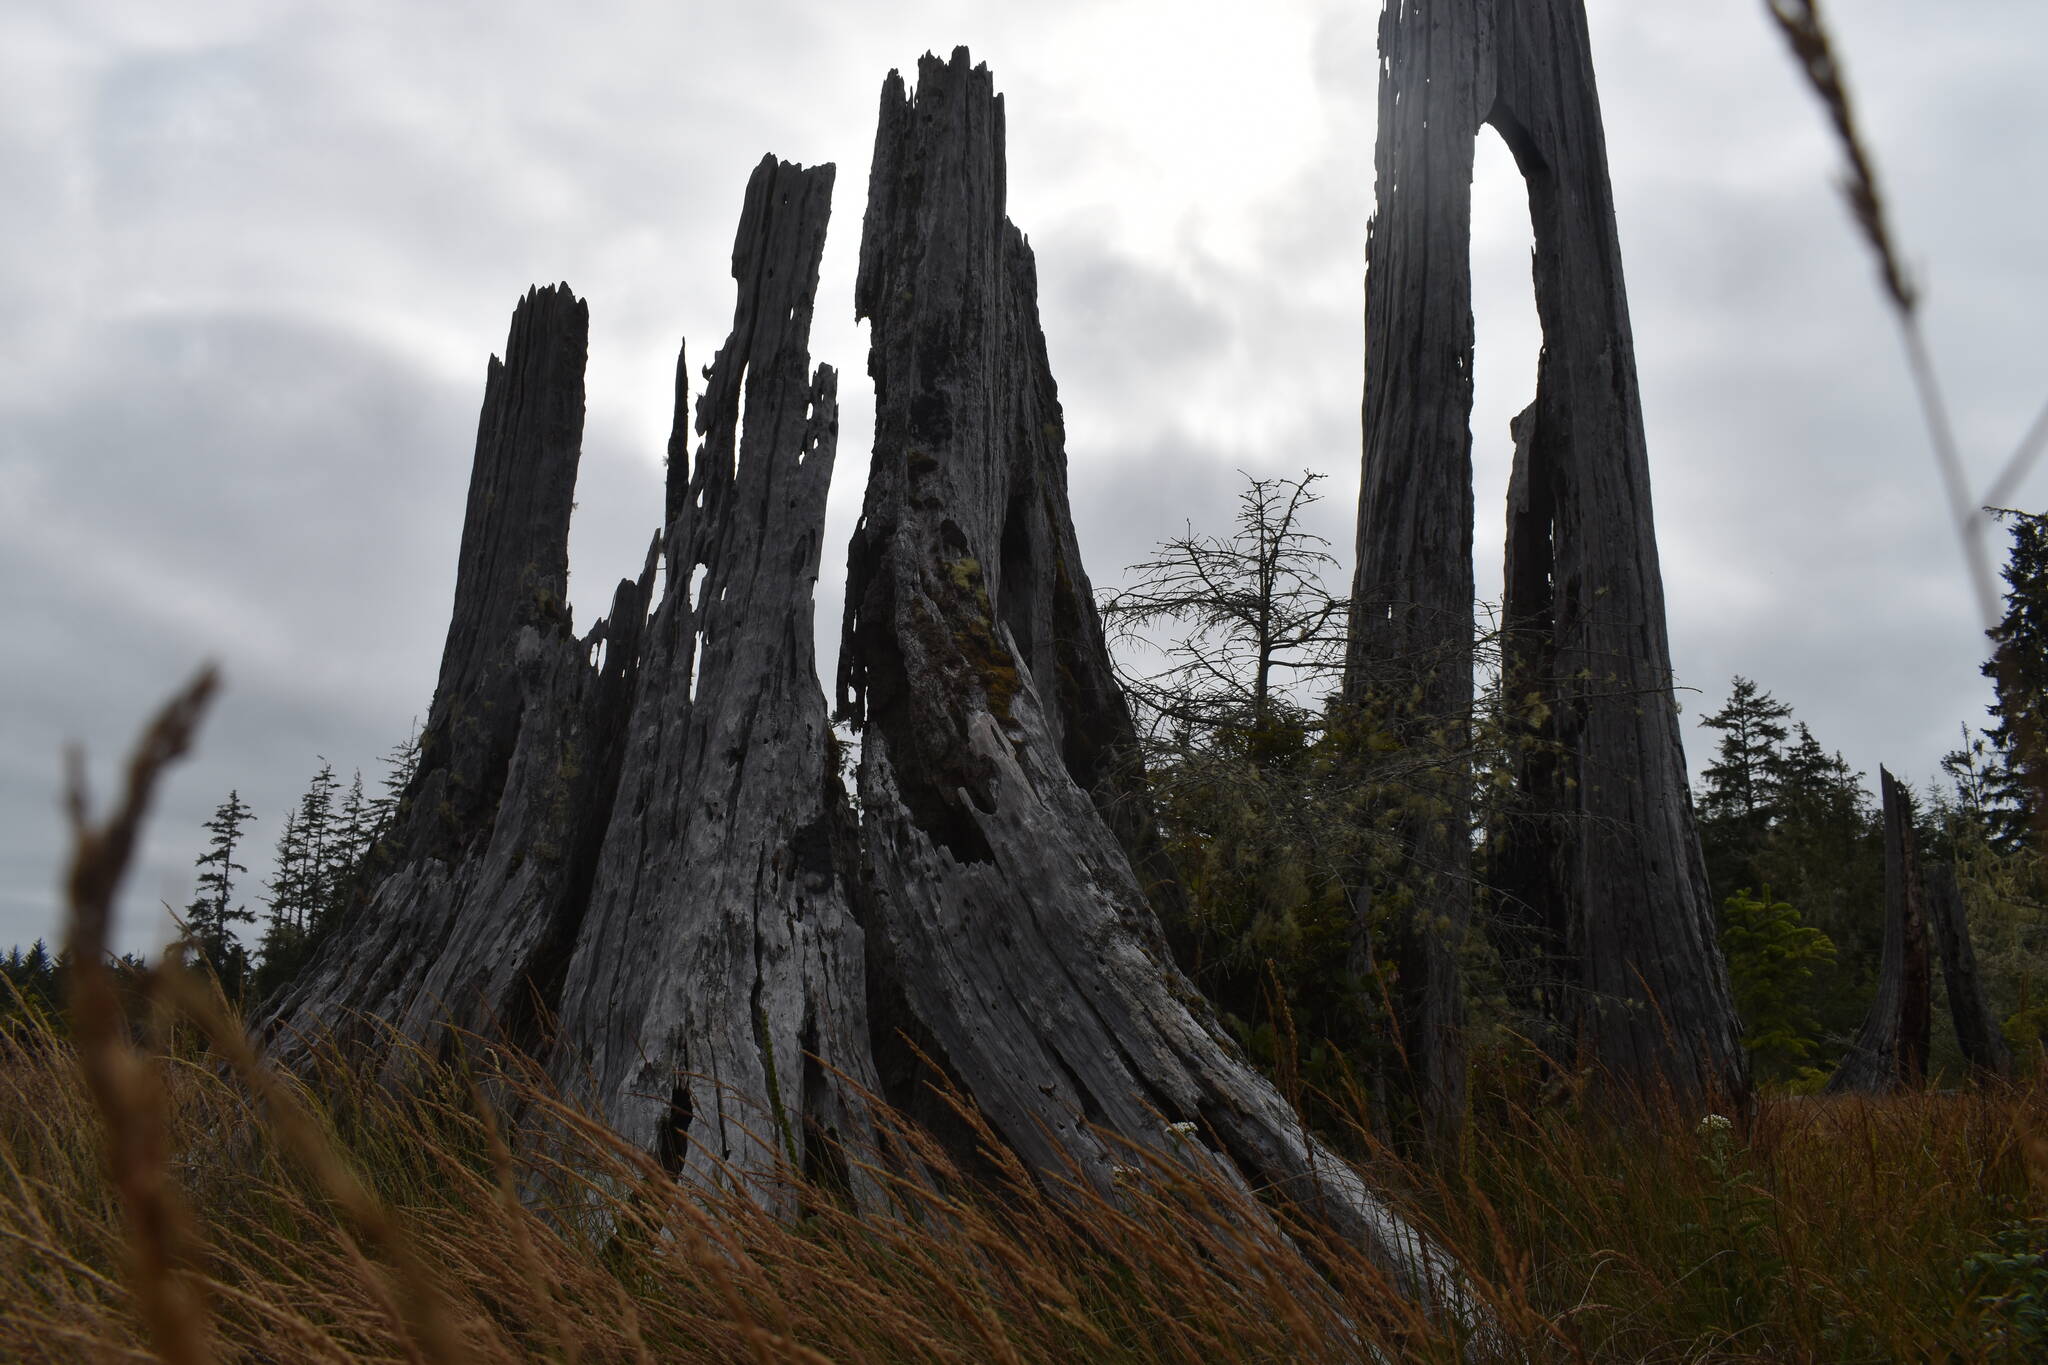 Clayton Franke / The Daily World
Despite being relatively rot-resistant, these western red cedar trees have decayed into an array of different shapes since their death 300 years ago.